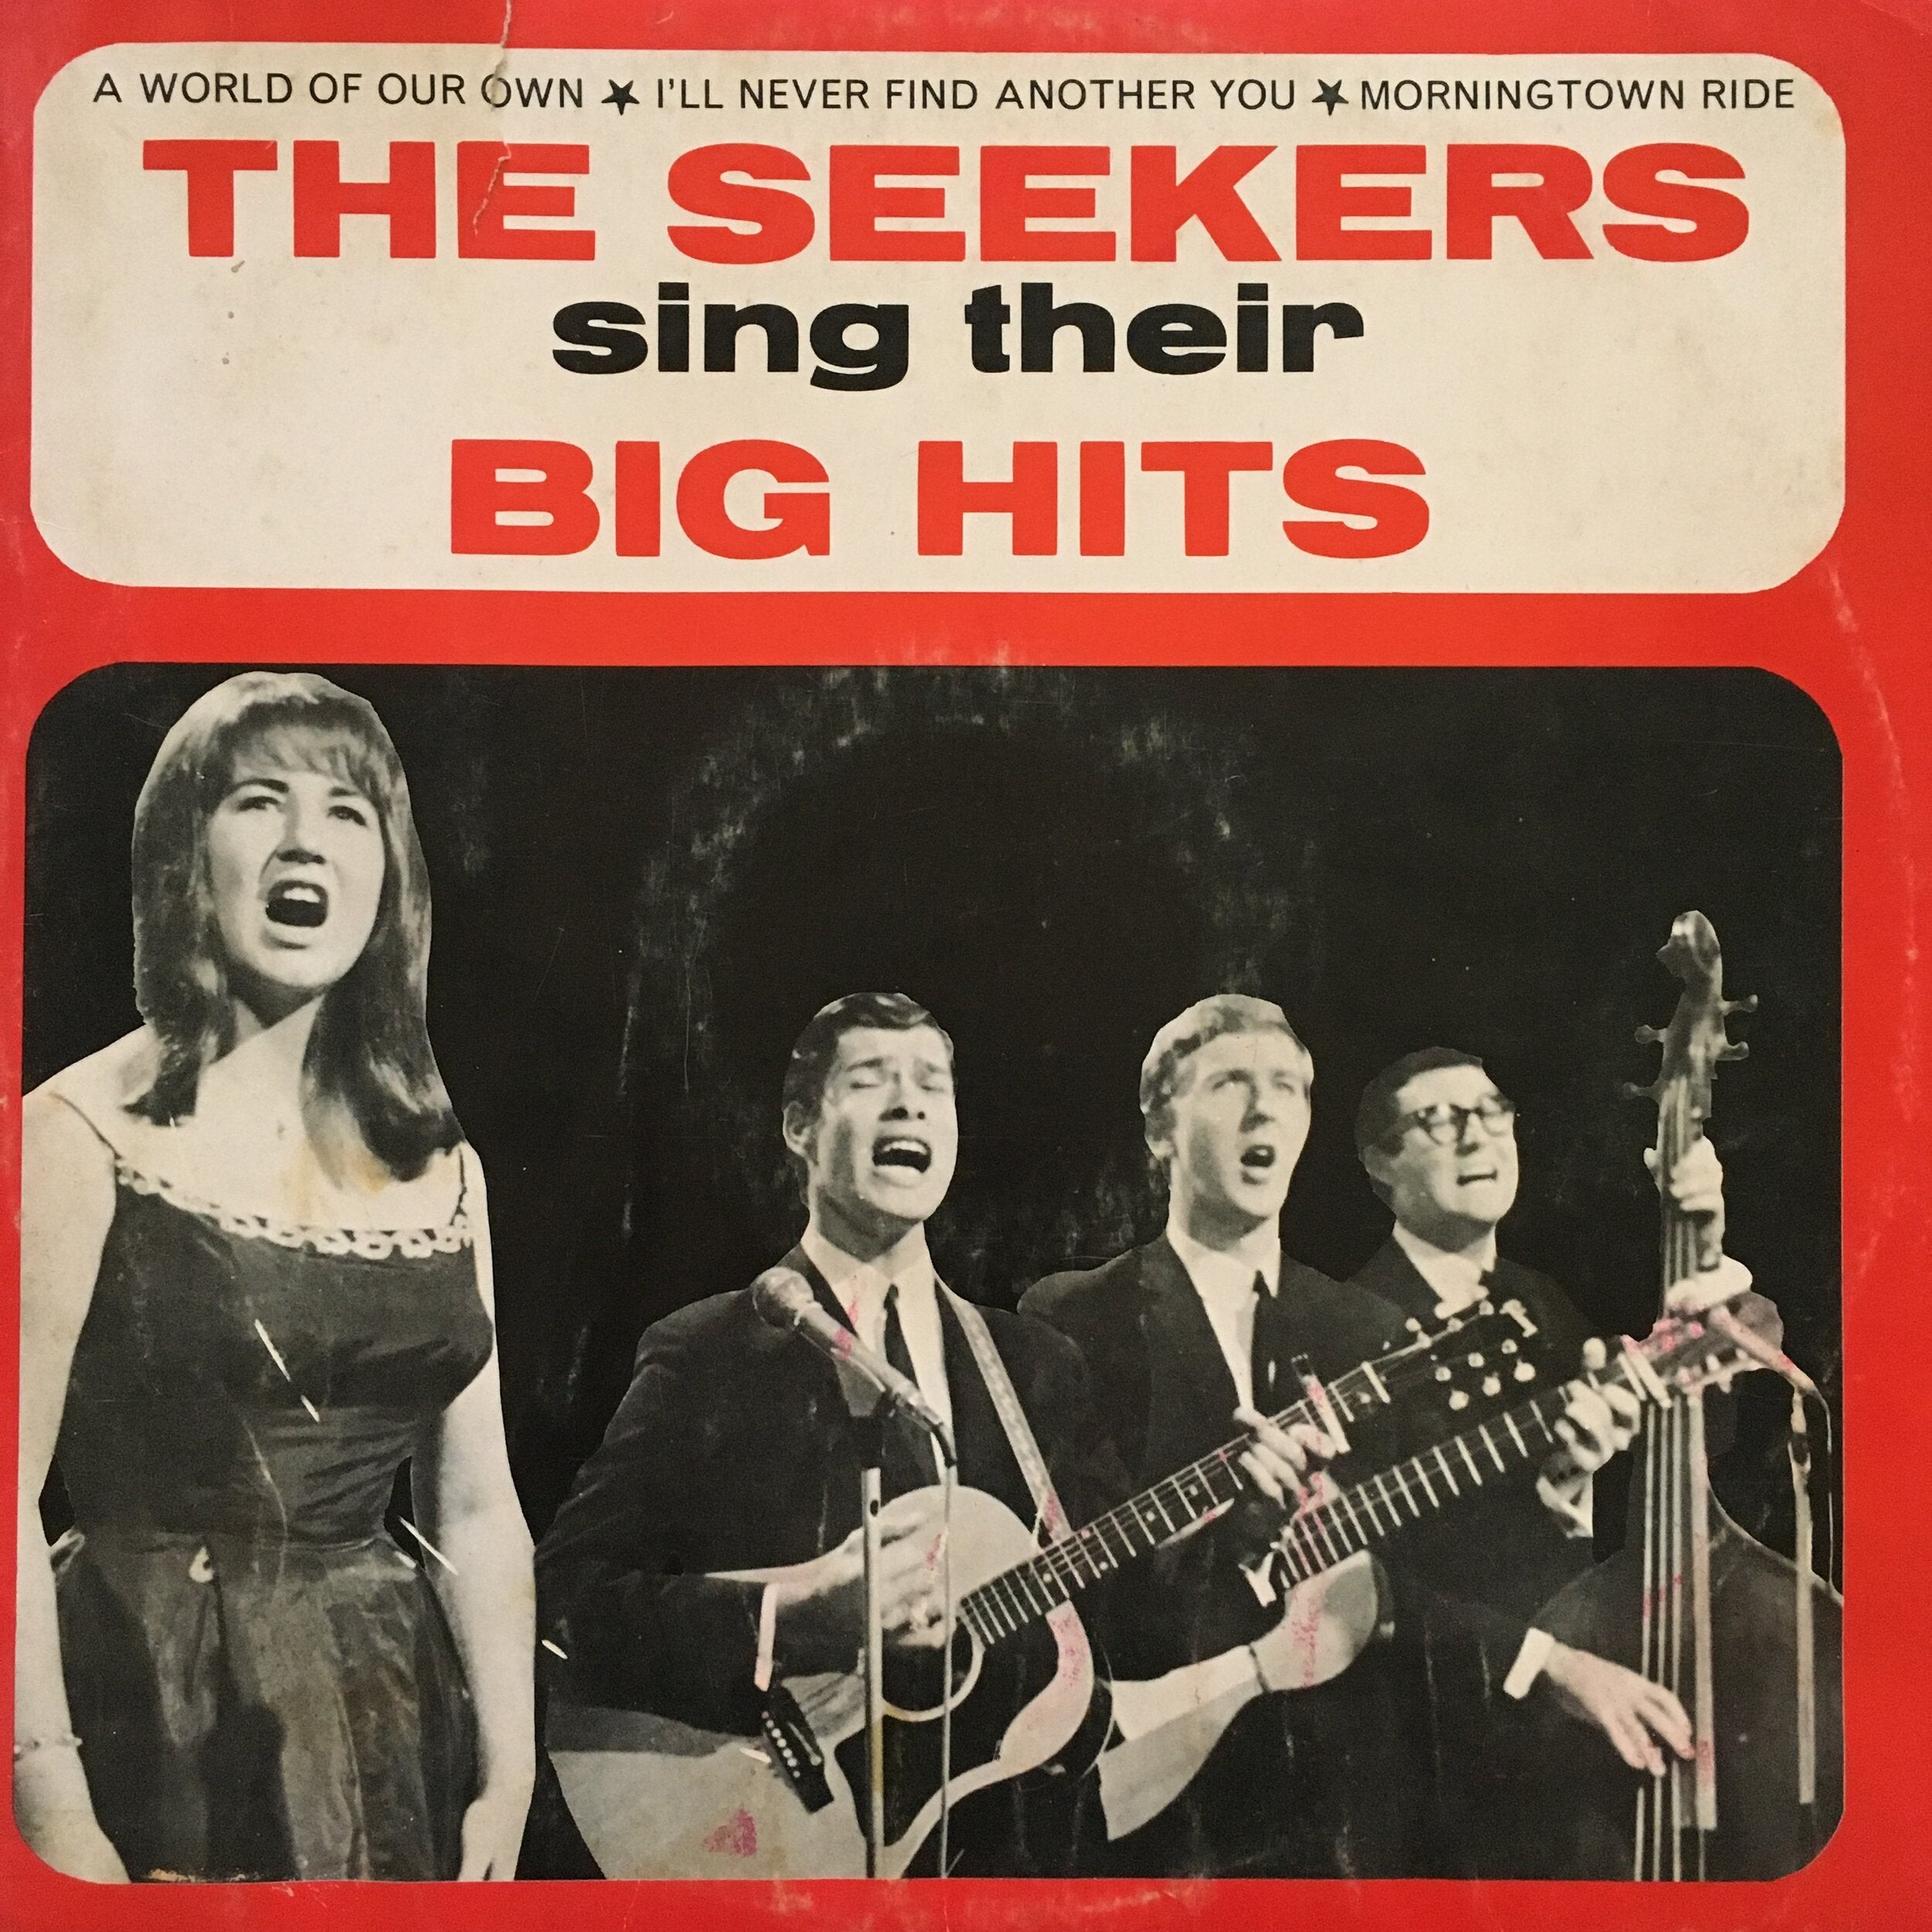 THE SEEKERS sing their BIG HITS